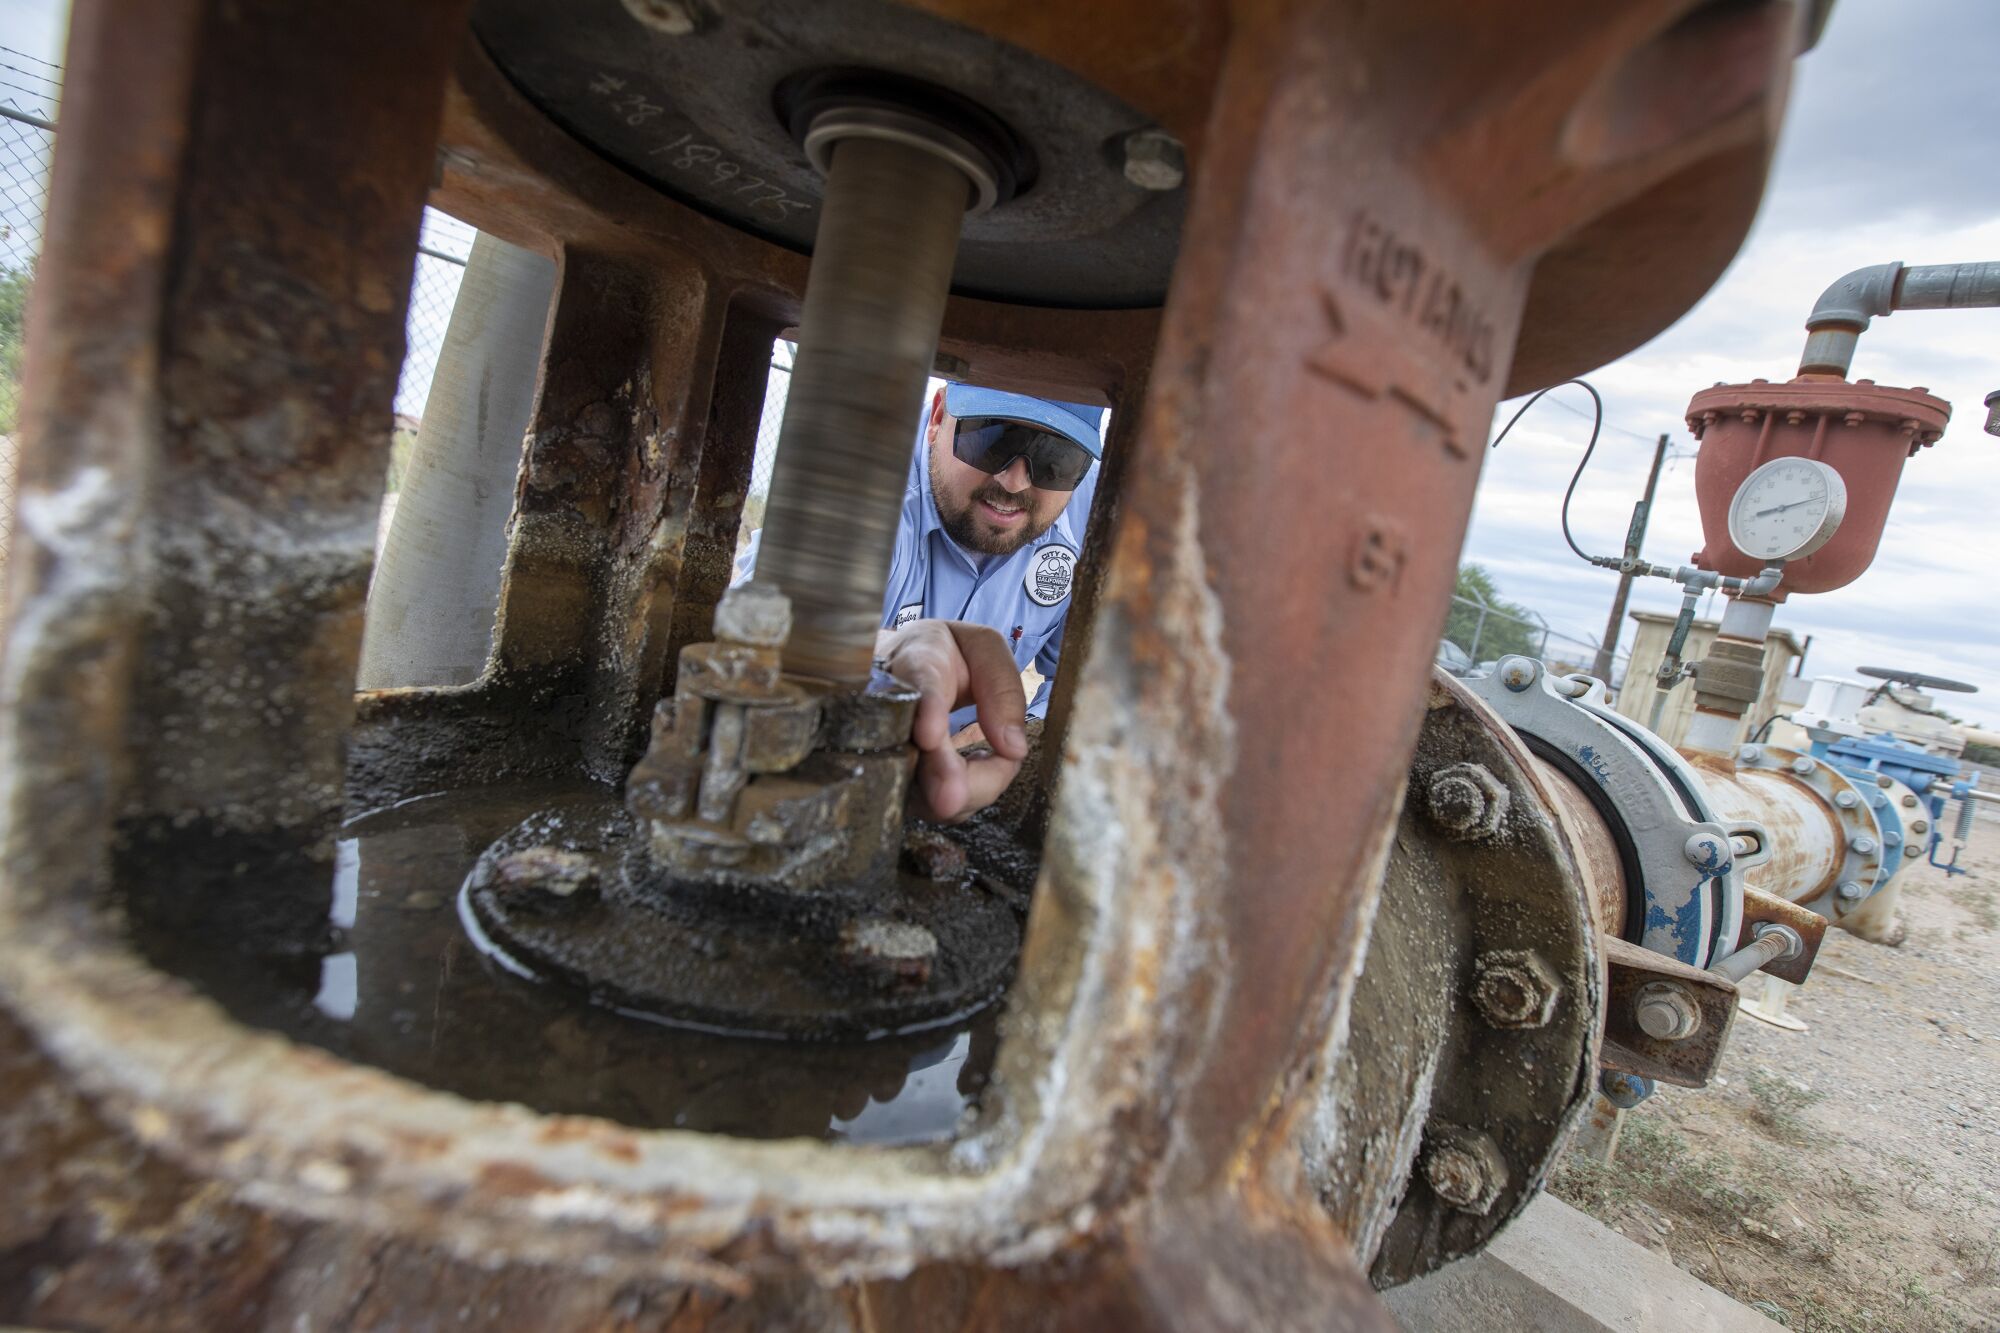 City of Needles Water operator Taylor Miller inspects the pump packing at well 15, the only operating water supply